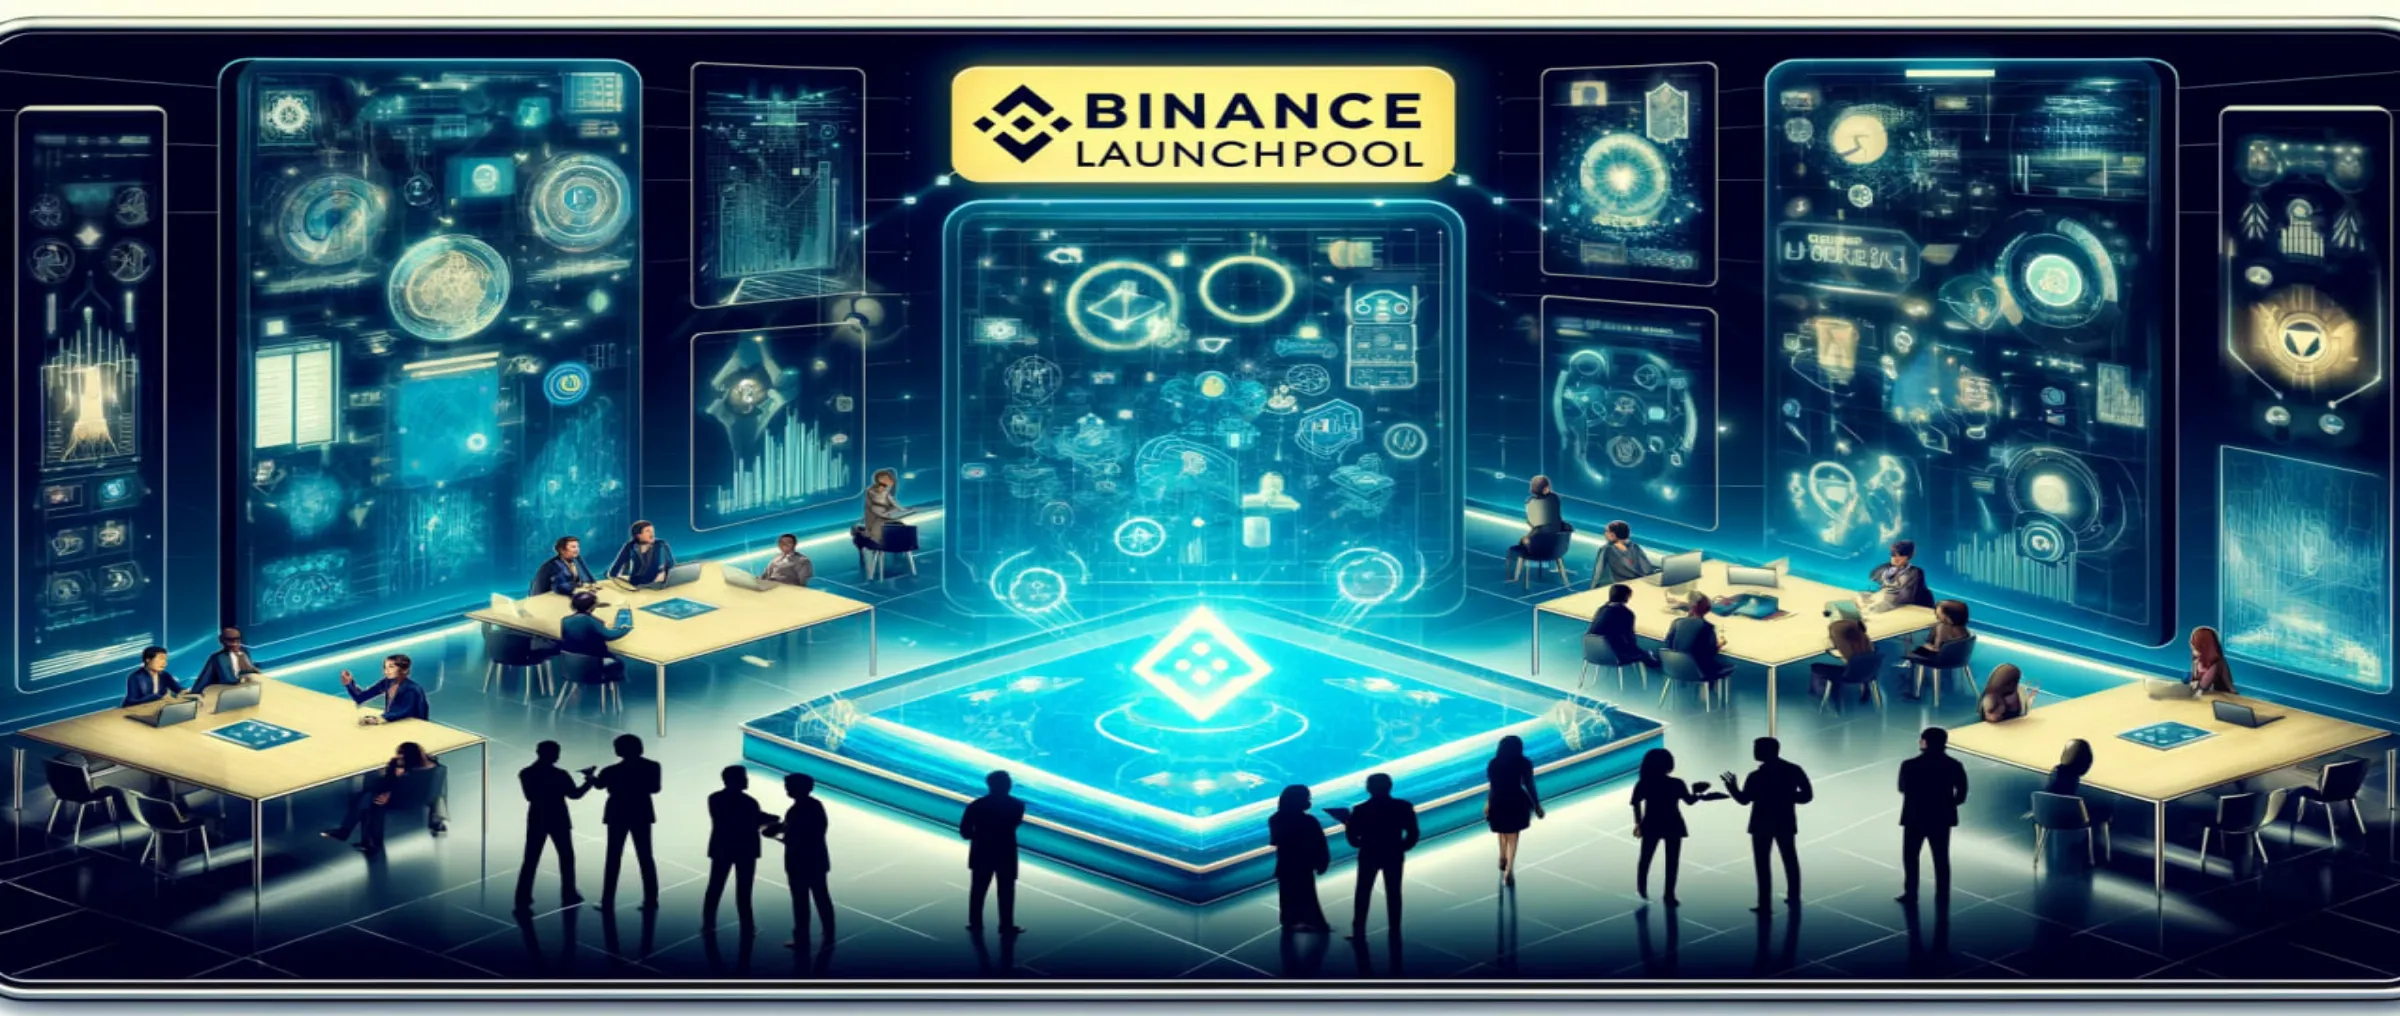 Analysts evaluated the success of Binance Launchpool startups